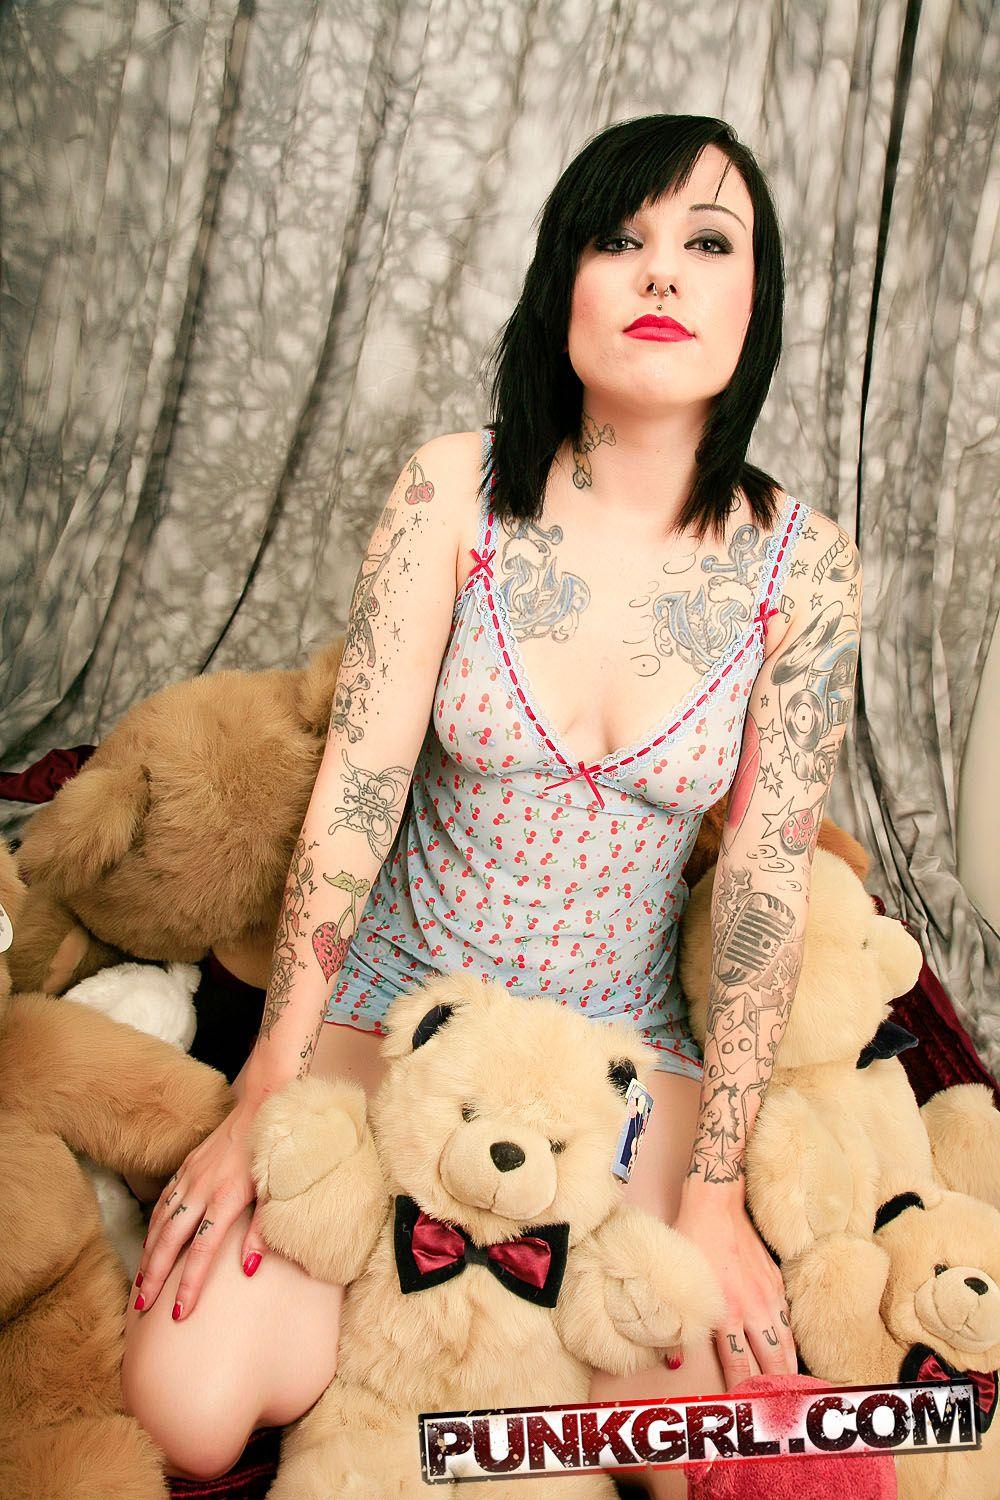 Pictures of teen punk Cherry teasing with her teddys #60764184